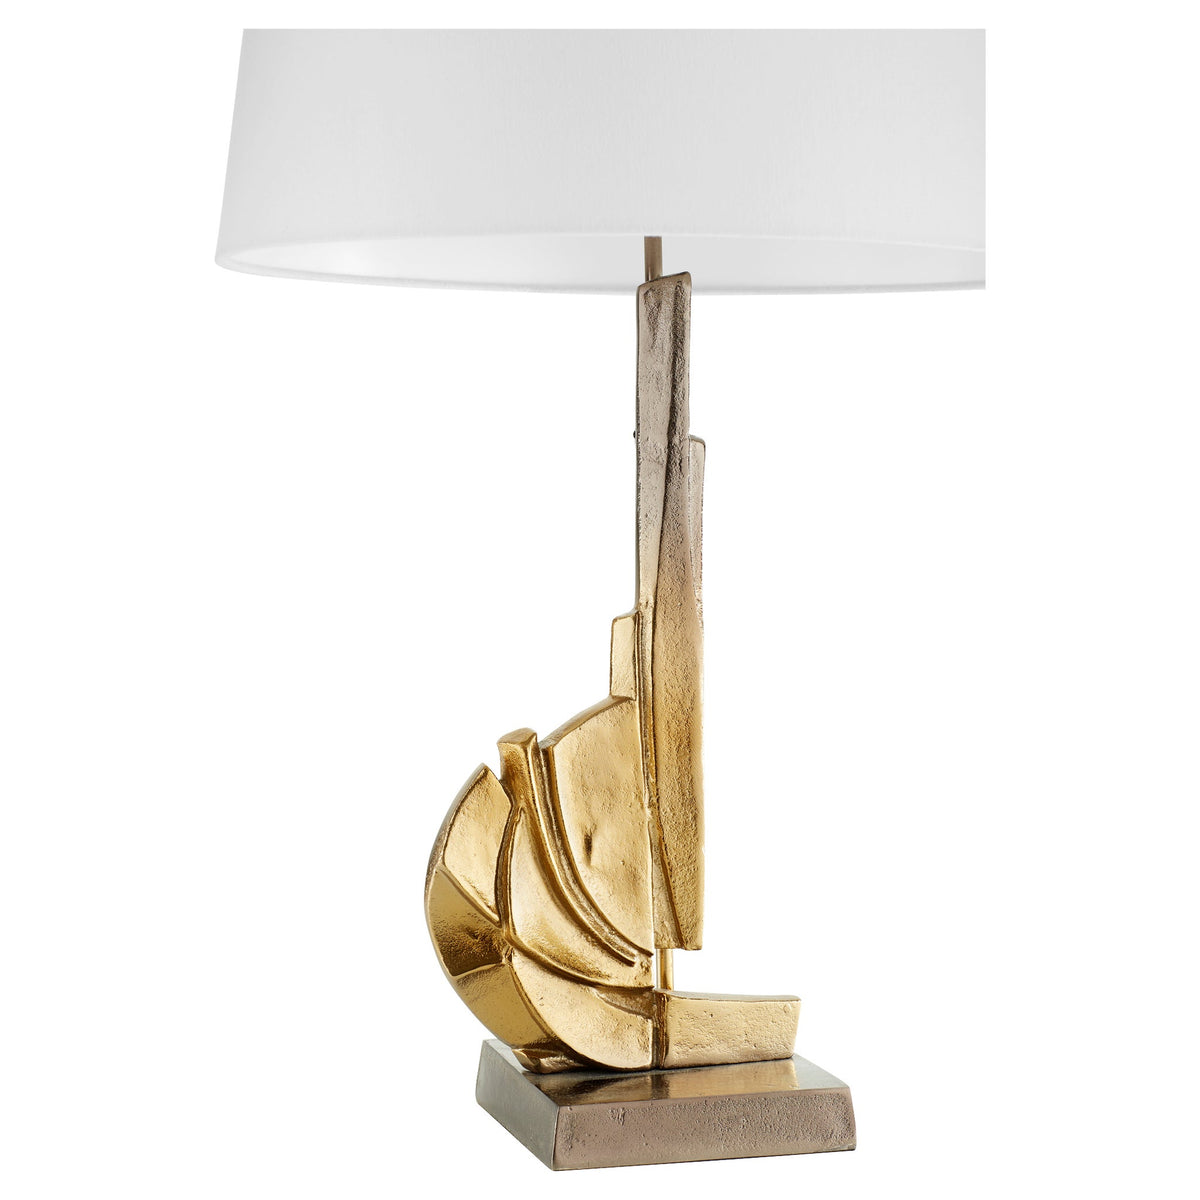 Crescendo Table Lamp by Cyan